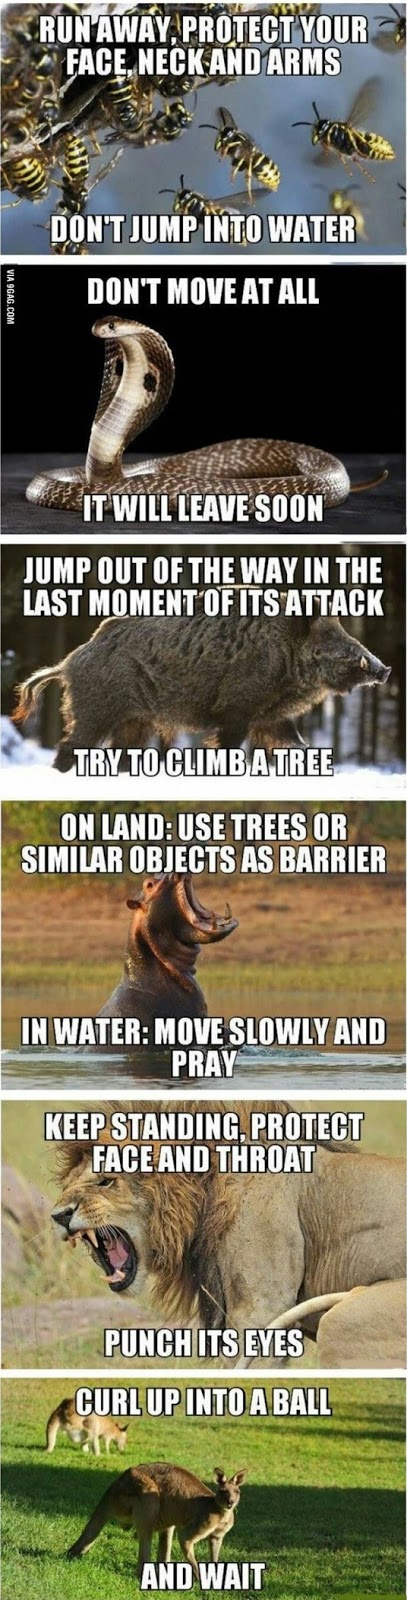 How To Defend Yourself From Wild Animals!